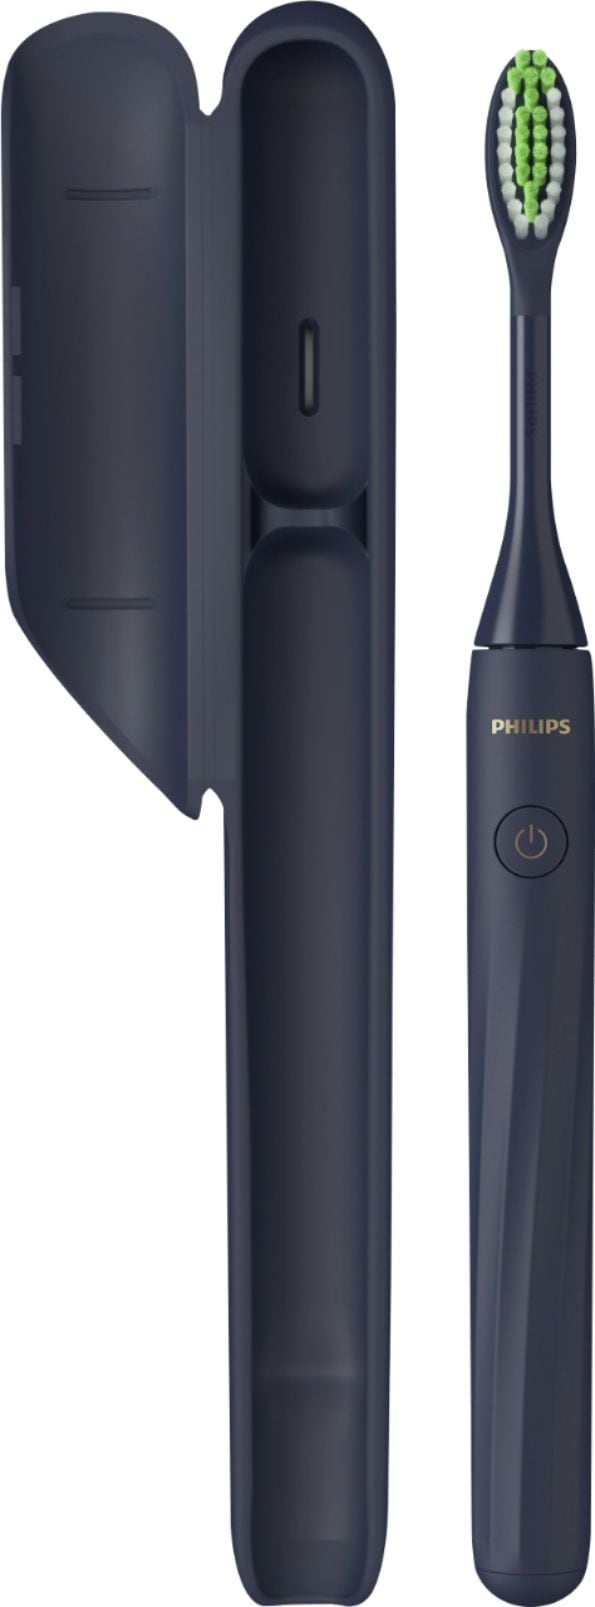 Philips Sonicare - Philips One by Sonicare Battery Toothbrush - Midnight Navy Blue_3